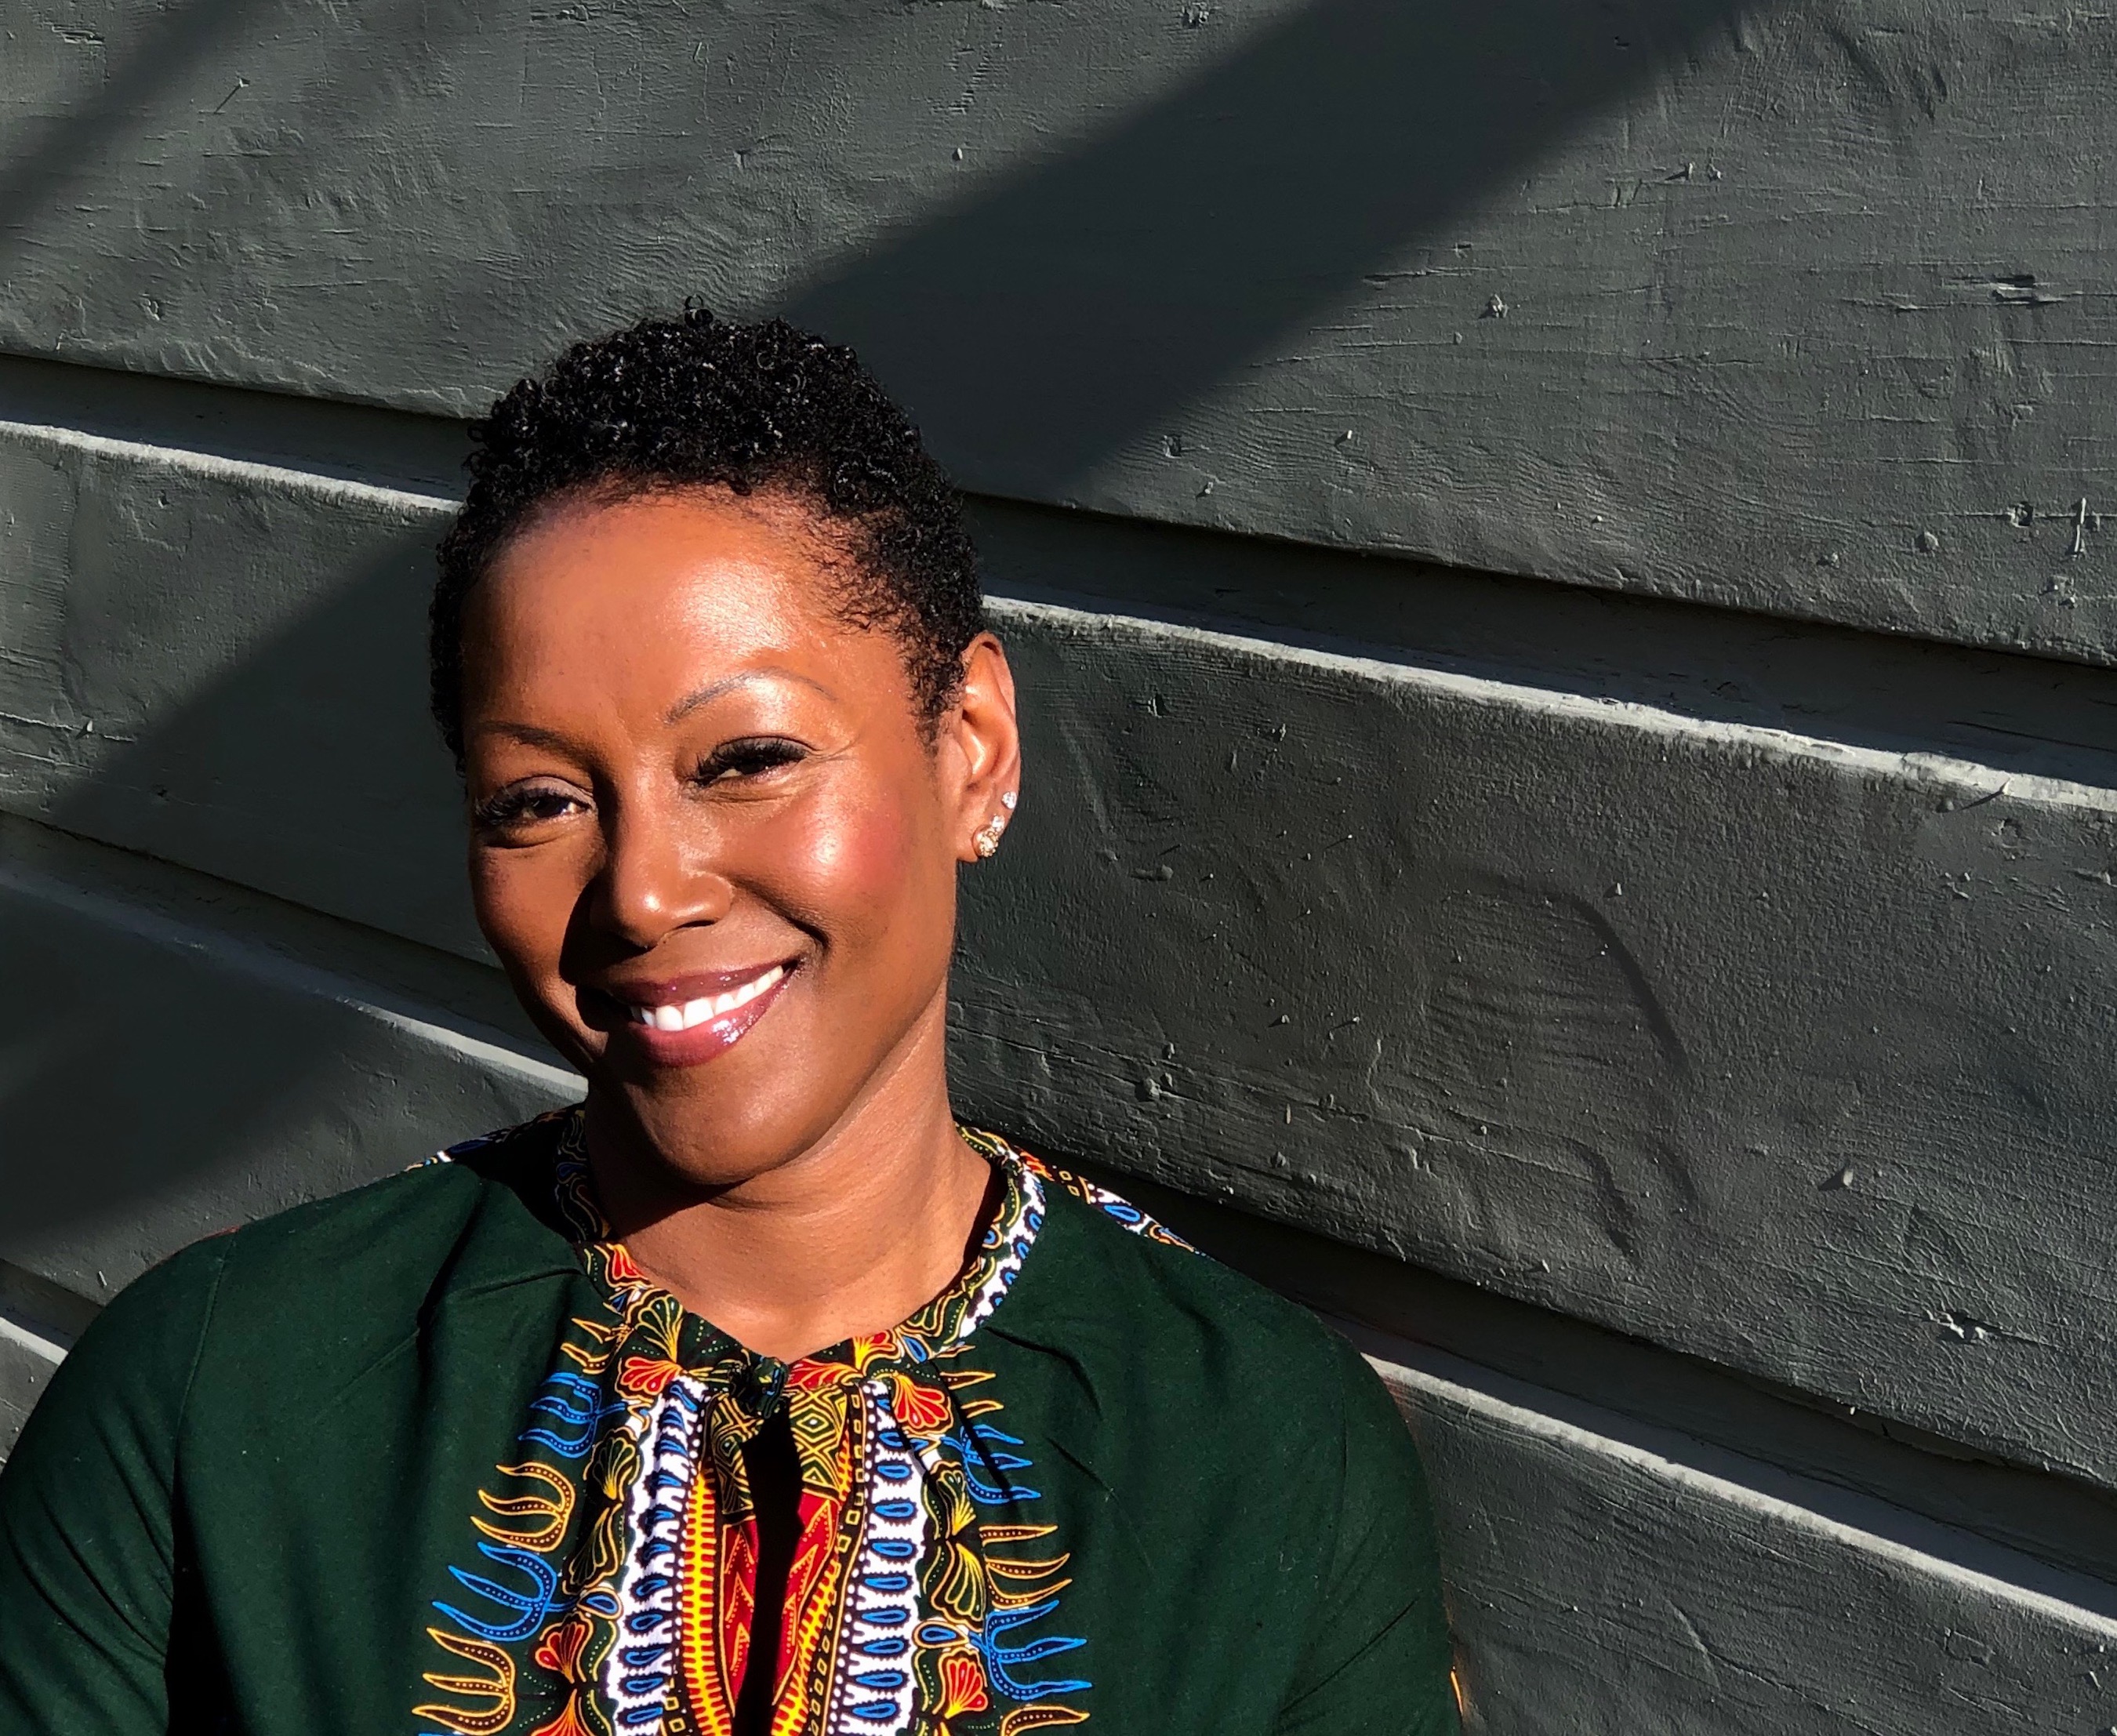 Photo of Dr. Monique Morris | A Black woman photographed against a building.  She is wearing a dark green top with an African print.  The sunlight is streaming down and she is smiling.  